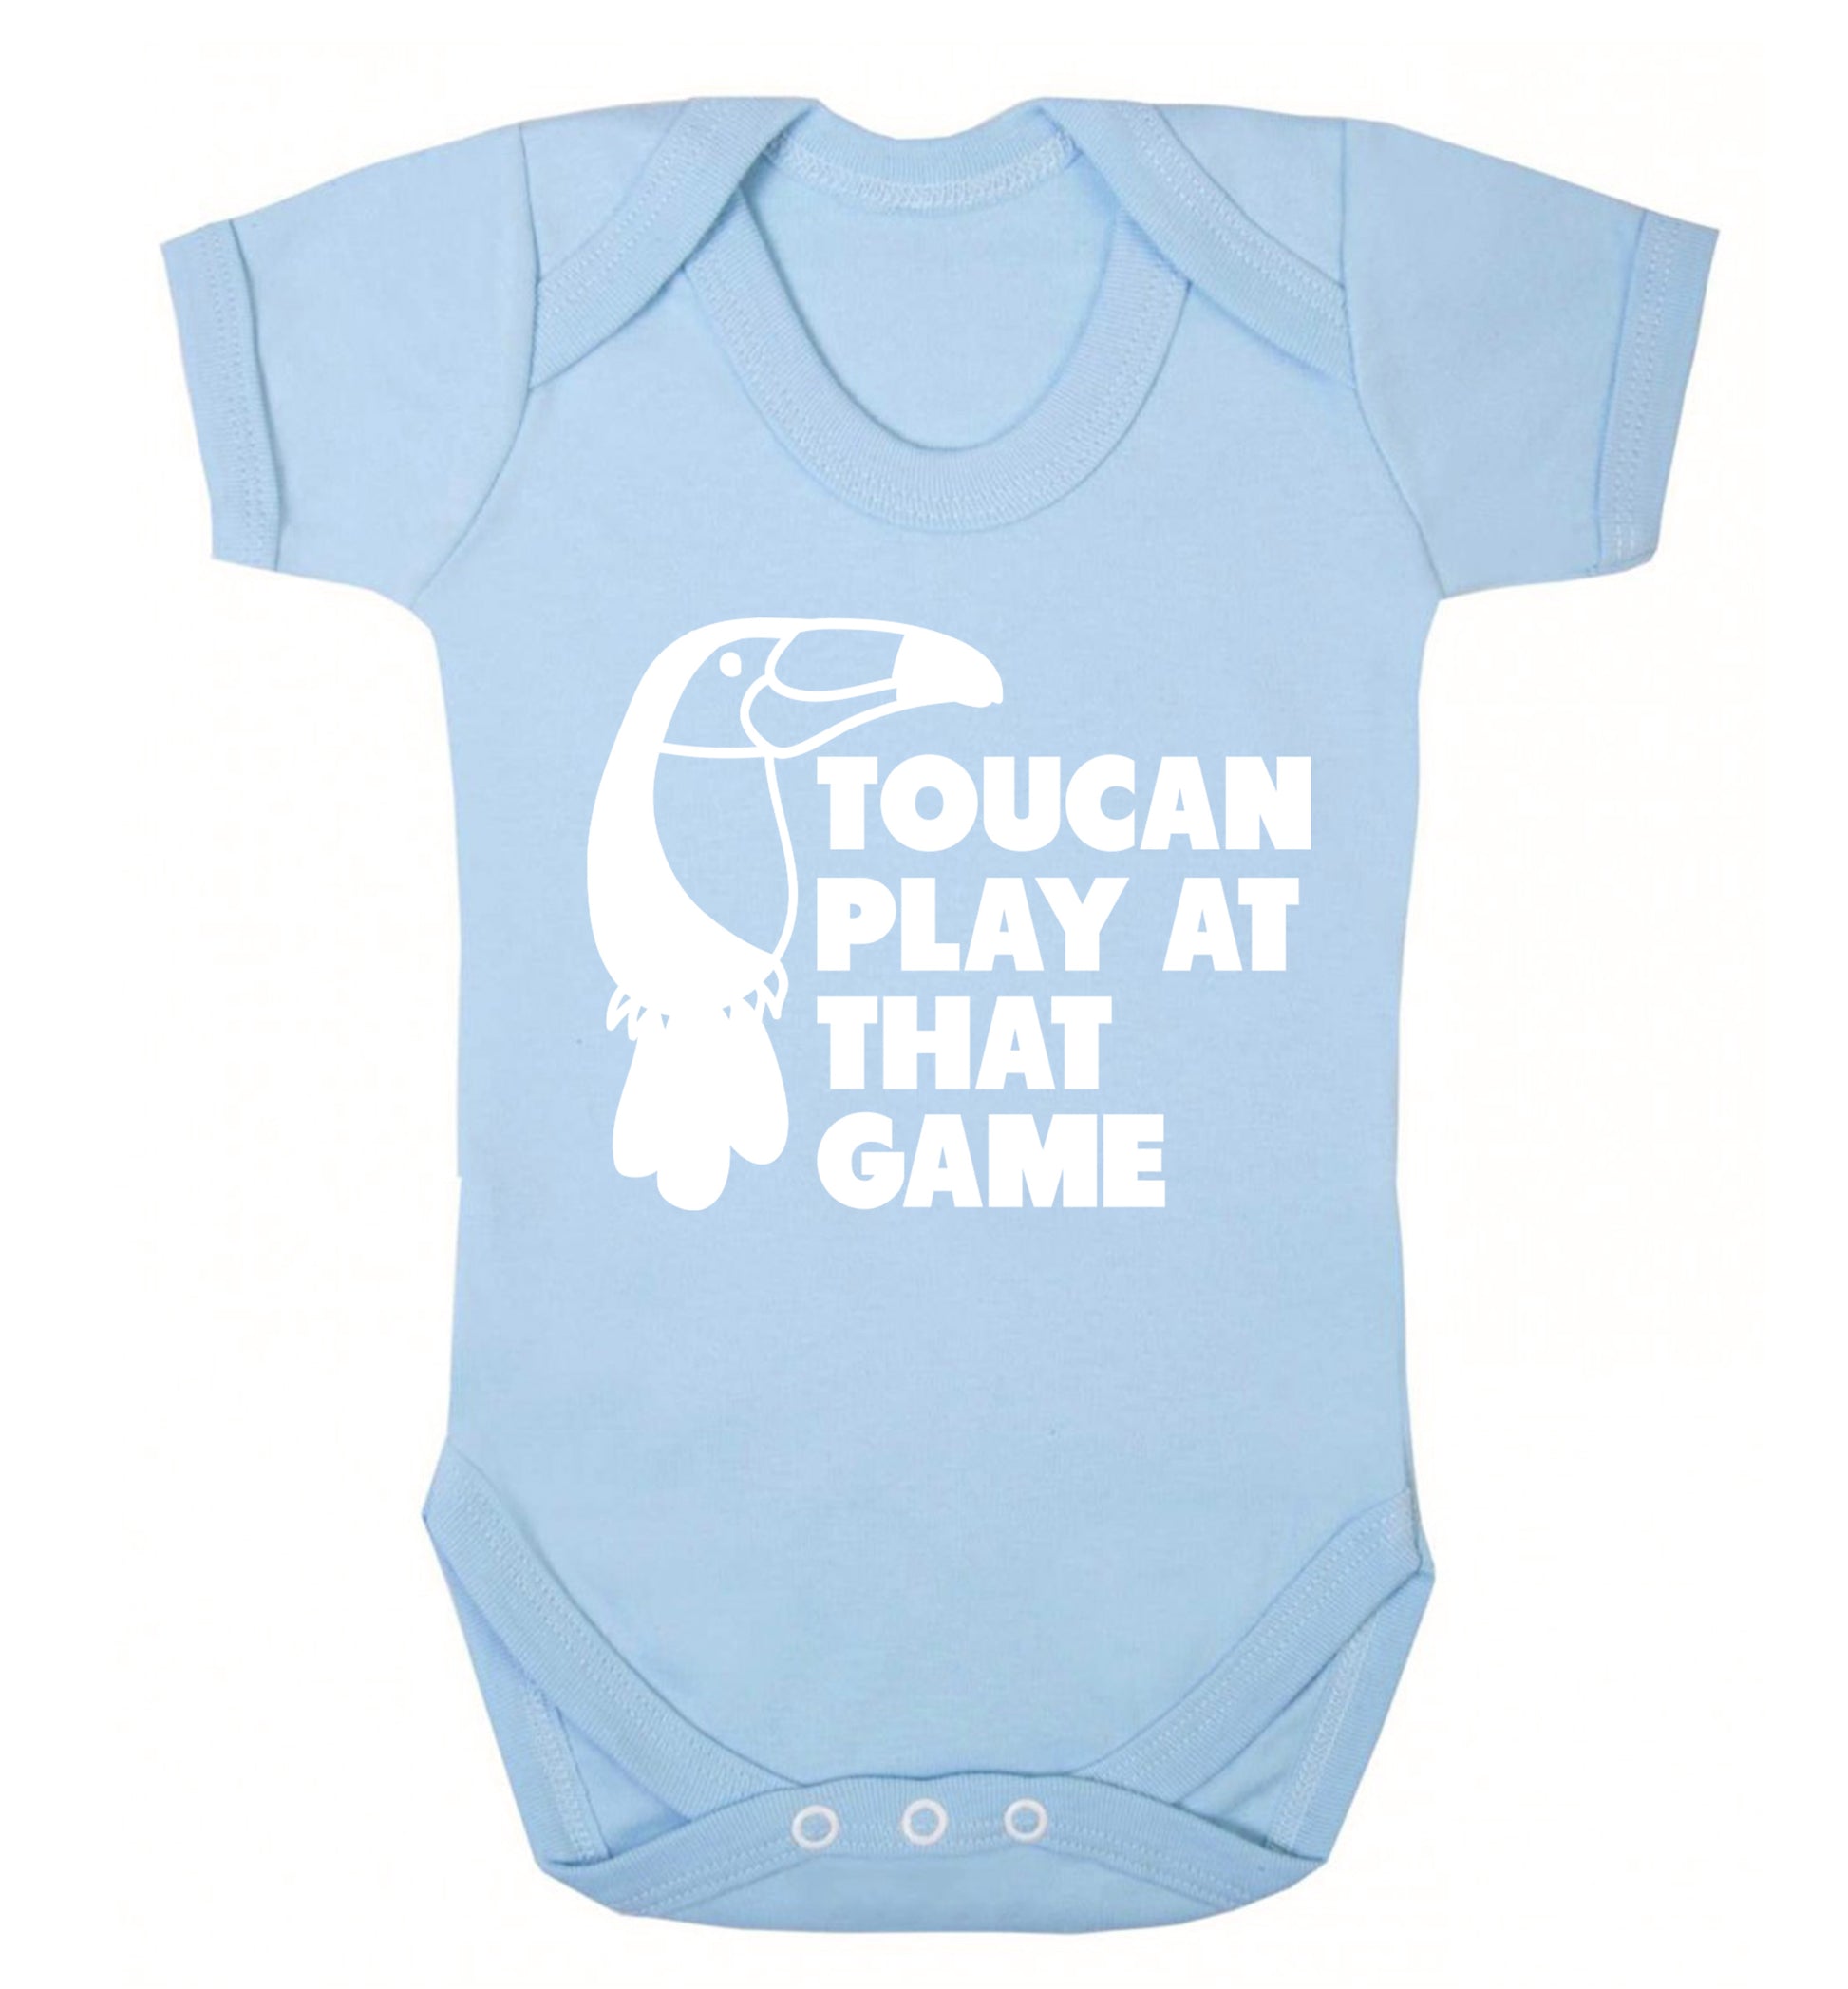 Toucan play at that game Baby Vest pale blue 18-24 months